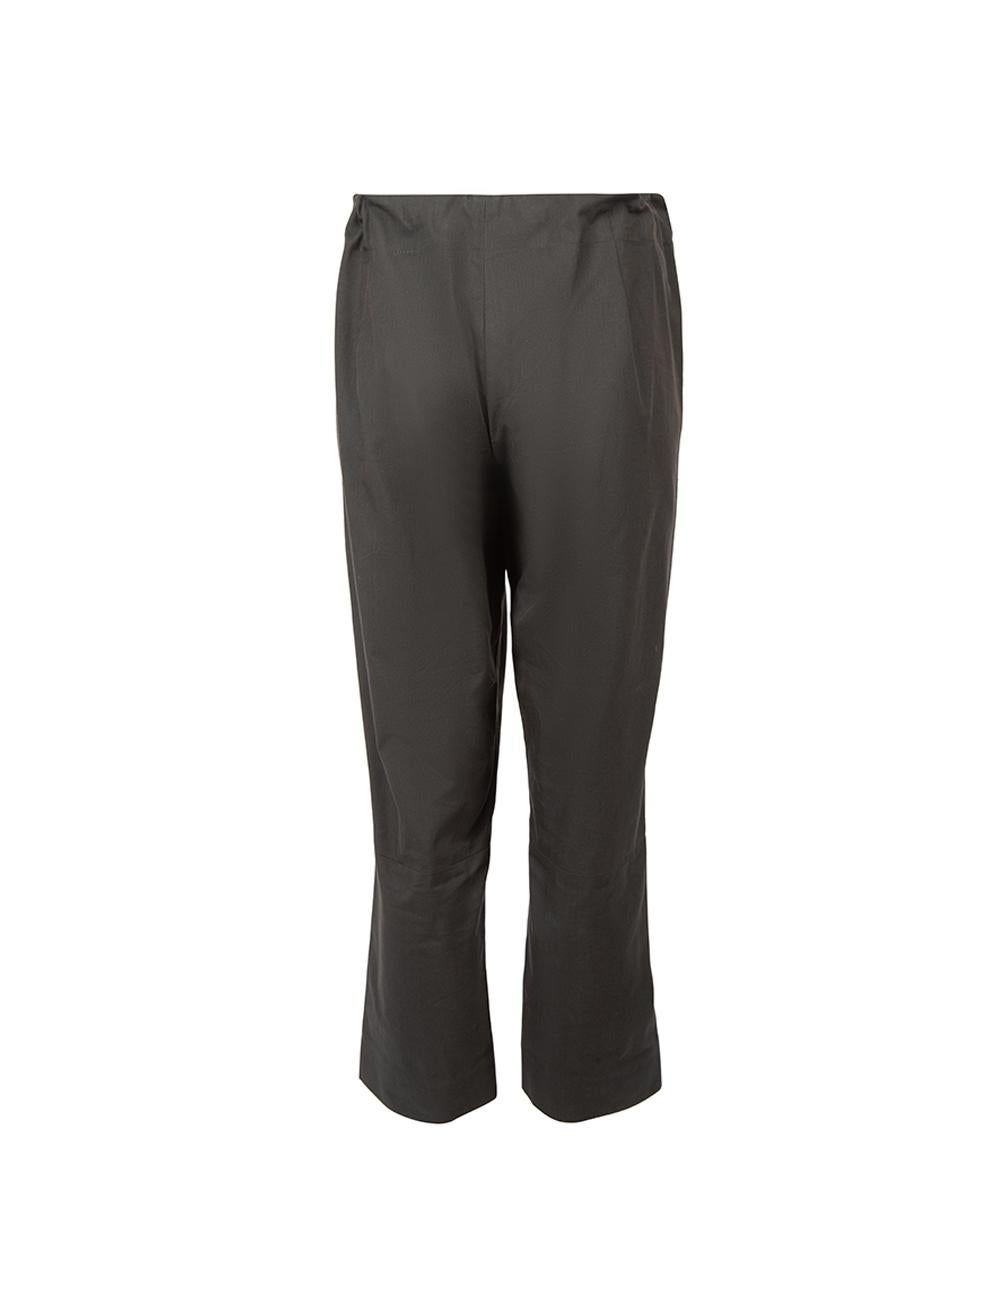 Marni Women's Grey Cropped Straight Leg Trousers In Good Condition For Sale In London, GB